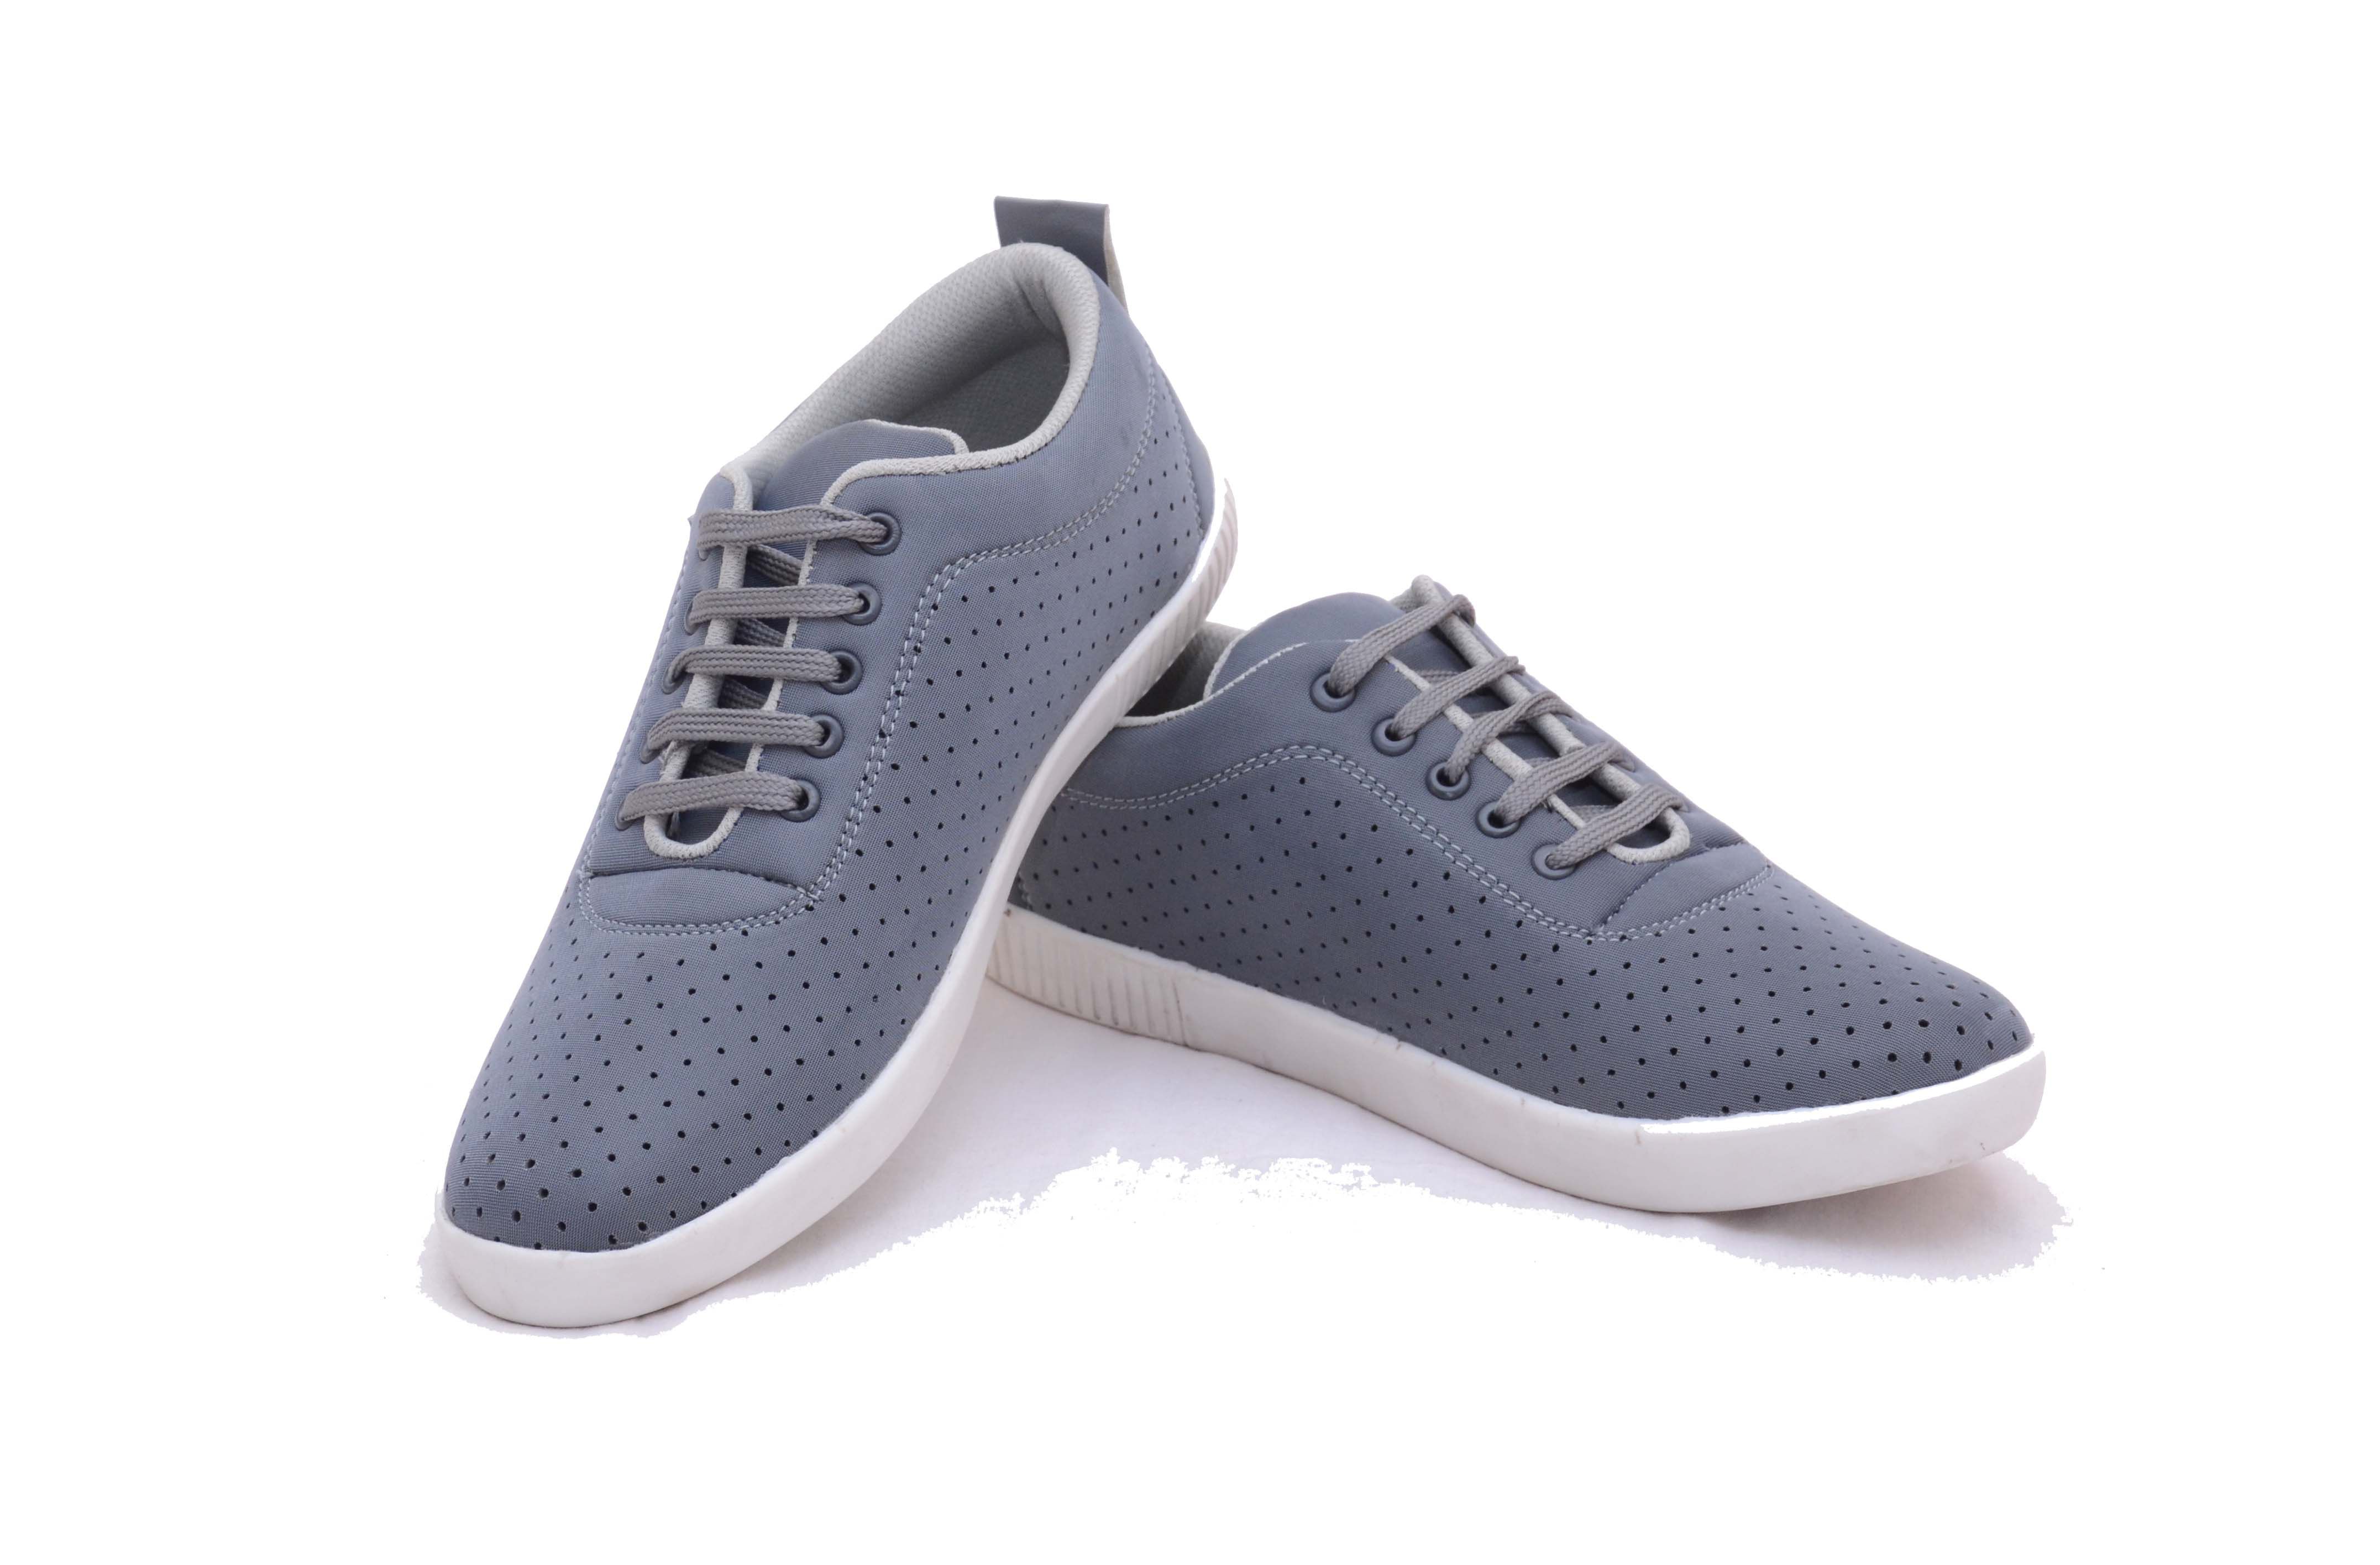 MOJDI Sneakers Gray Casual Shoes - Buy 